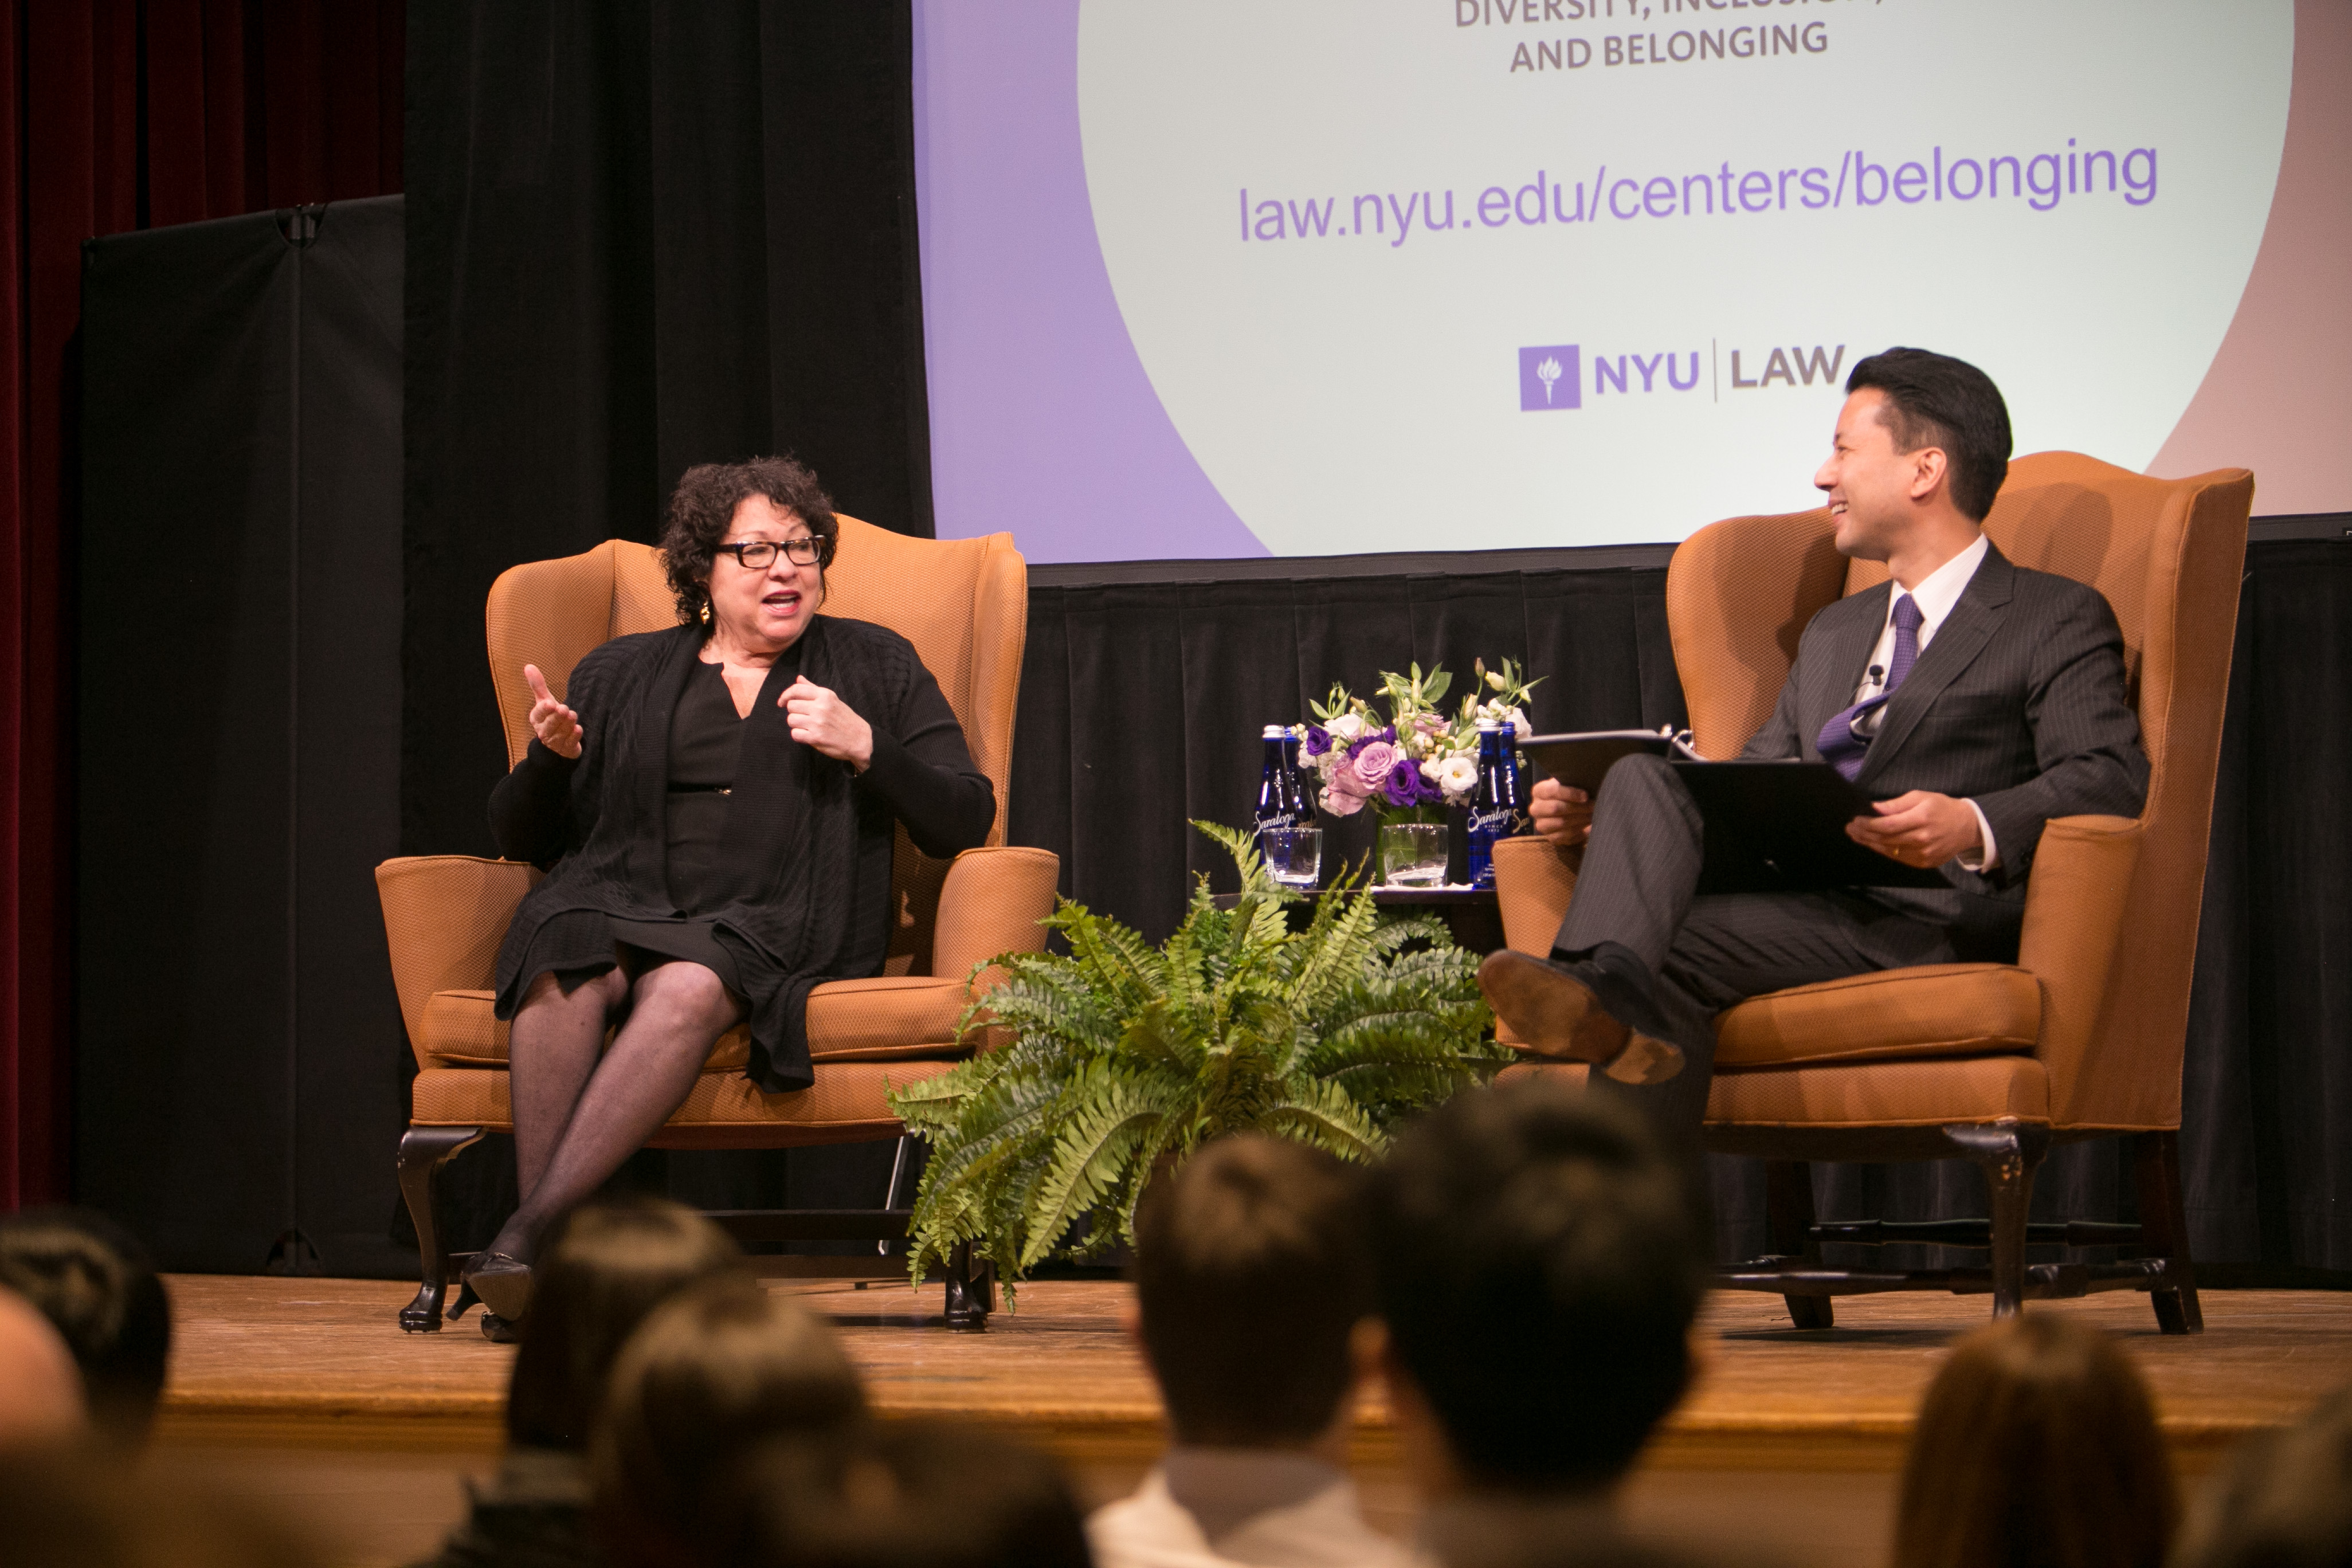  Justice Sotomayor and Professor Yoshino engage in discussion